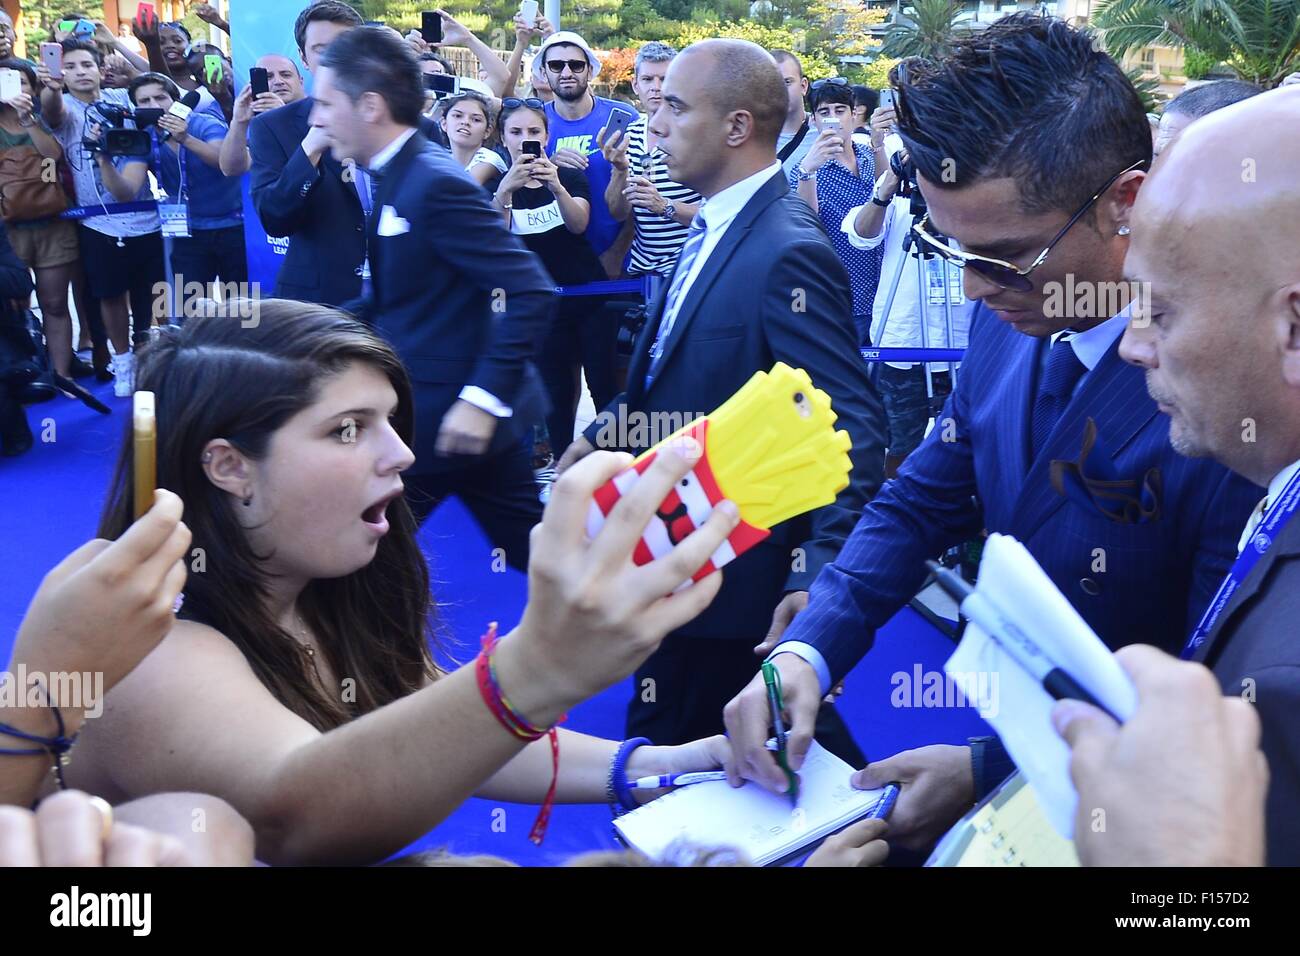 Monaco. 27th Aug, 2015. Real Madrid forward CRISTIANO RONALDO autographing  for fans while walking in the Forum Grimaldi Blue Carpet to attend the best  Europe soccer player election 2015. Credit: Marcio Machado/ZUMA